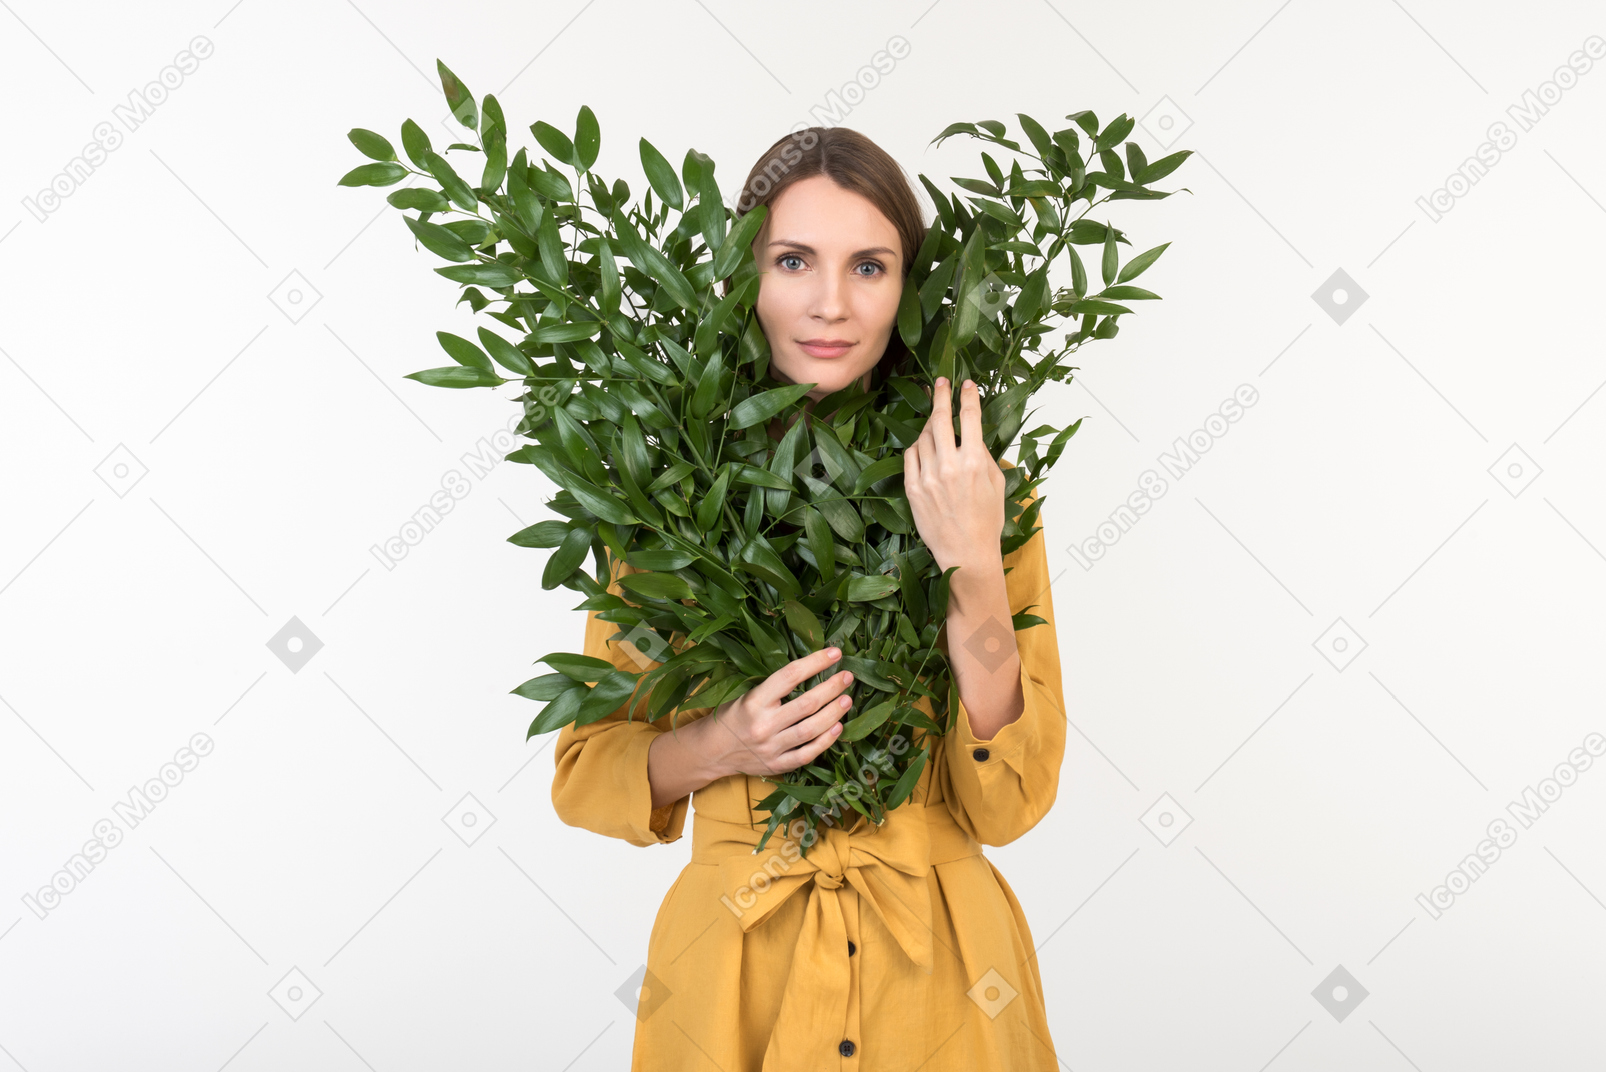 Young woman sticking face out of branches